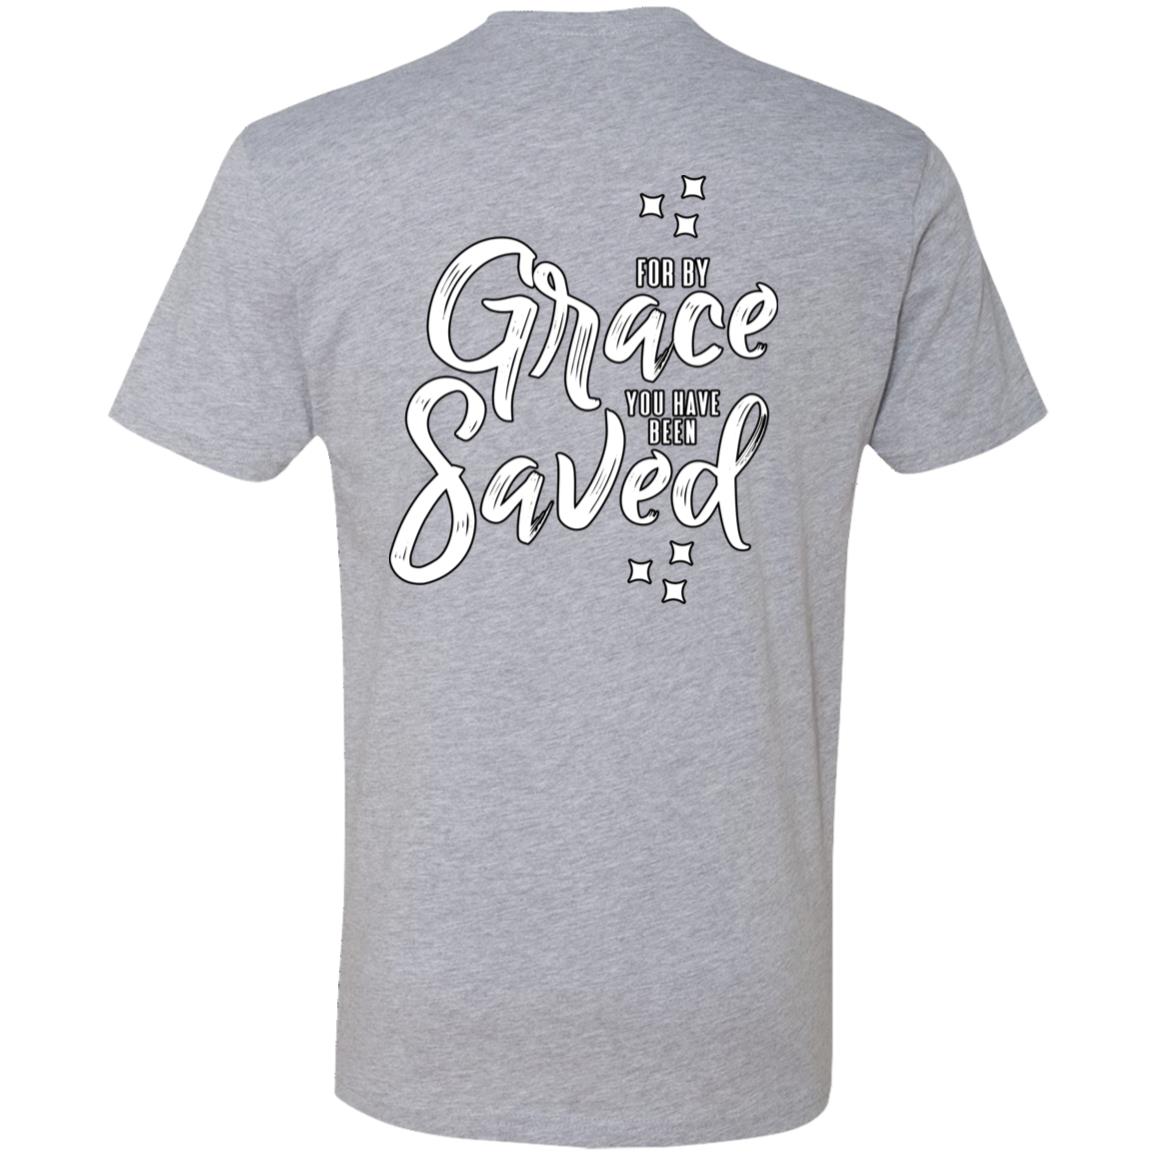 For by Grace (Unisex Tee)